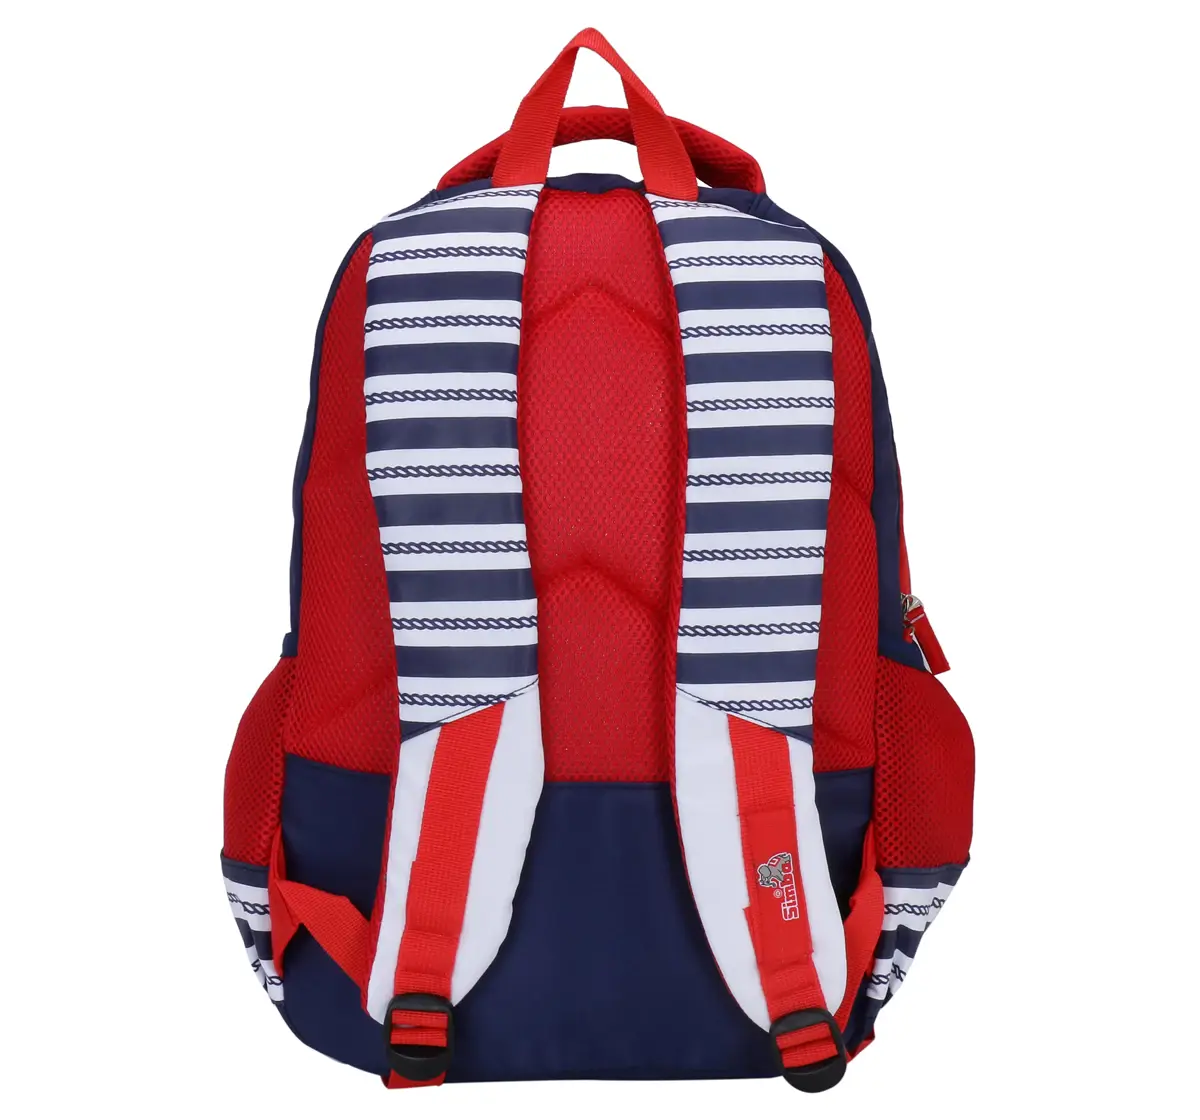 Simba Gravity Great Adventure 17 Backpack Multicolor 3Y+